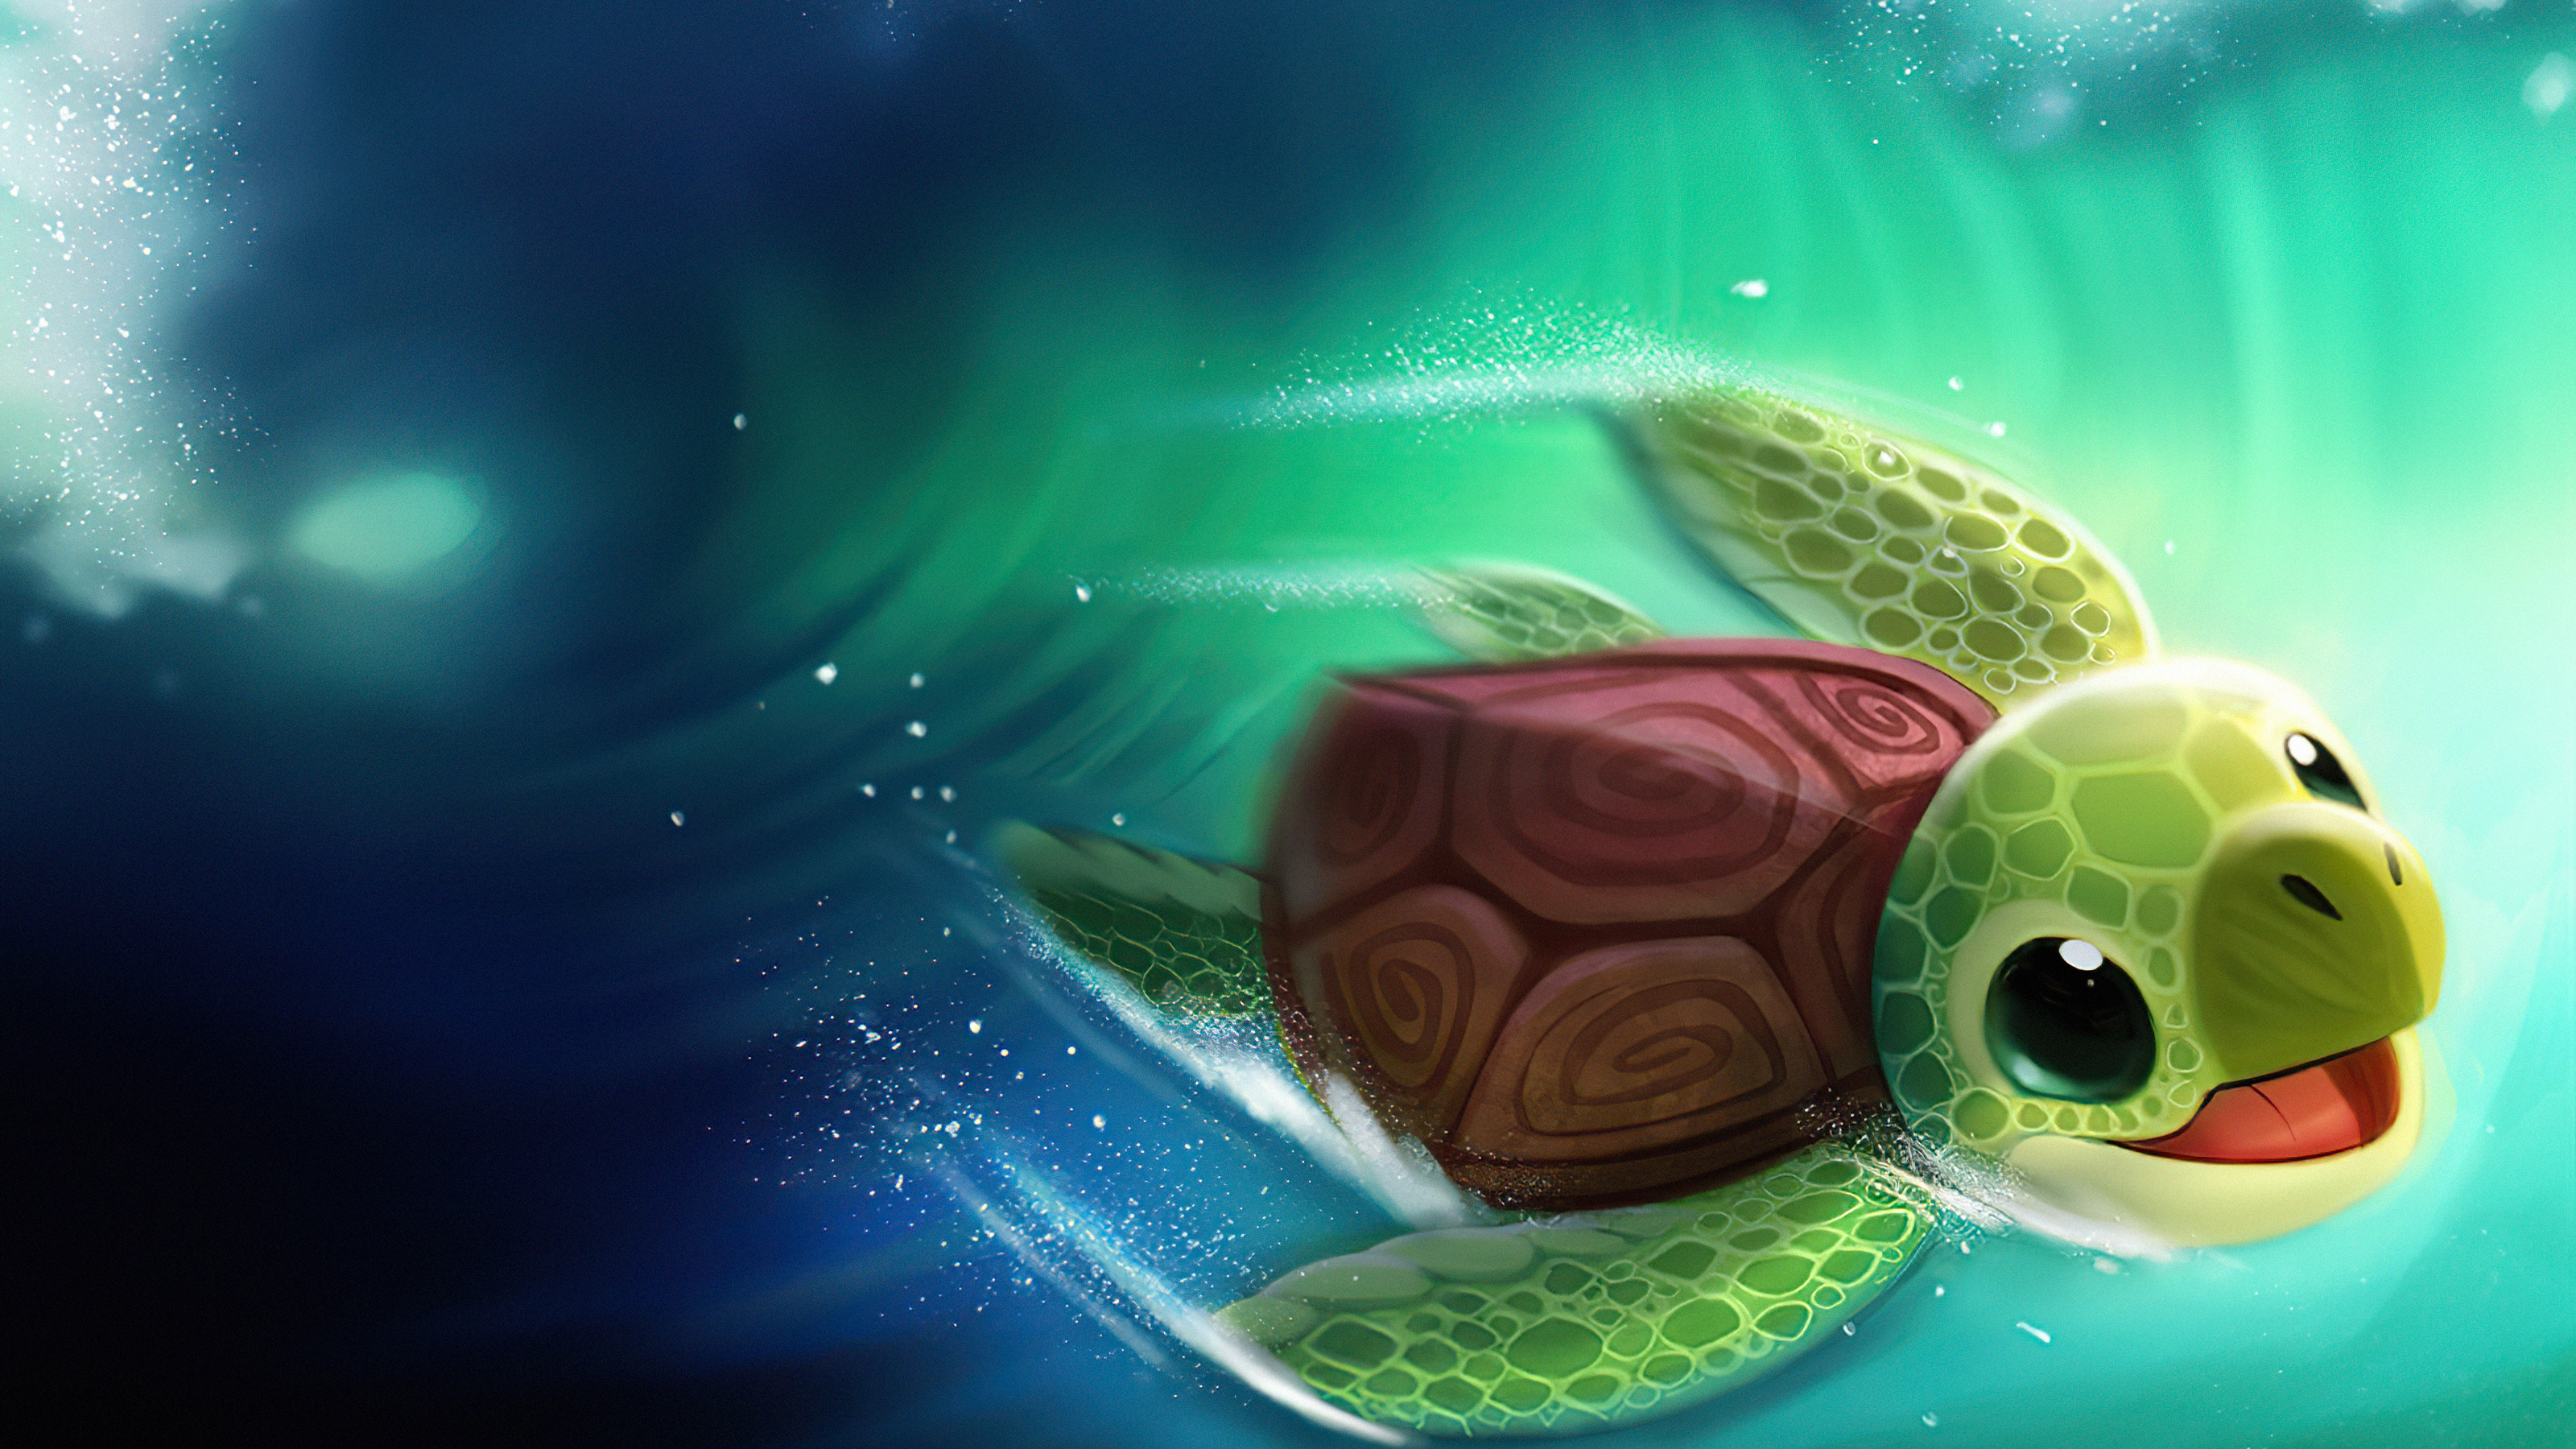 3200x1800 20+ Fantasy Turtle HD Wallpapers and Backgrounds